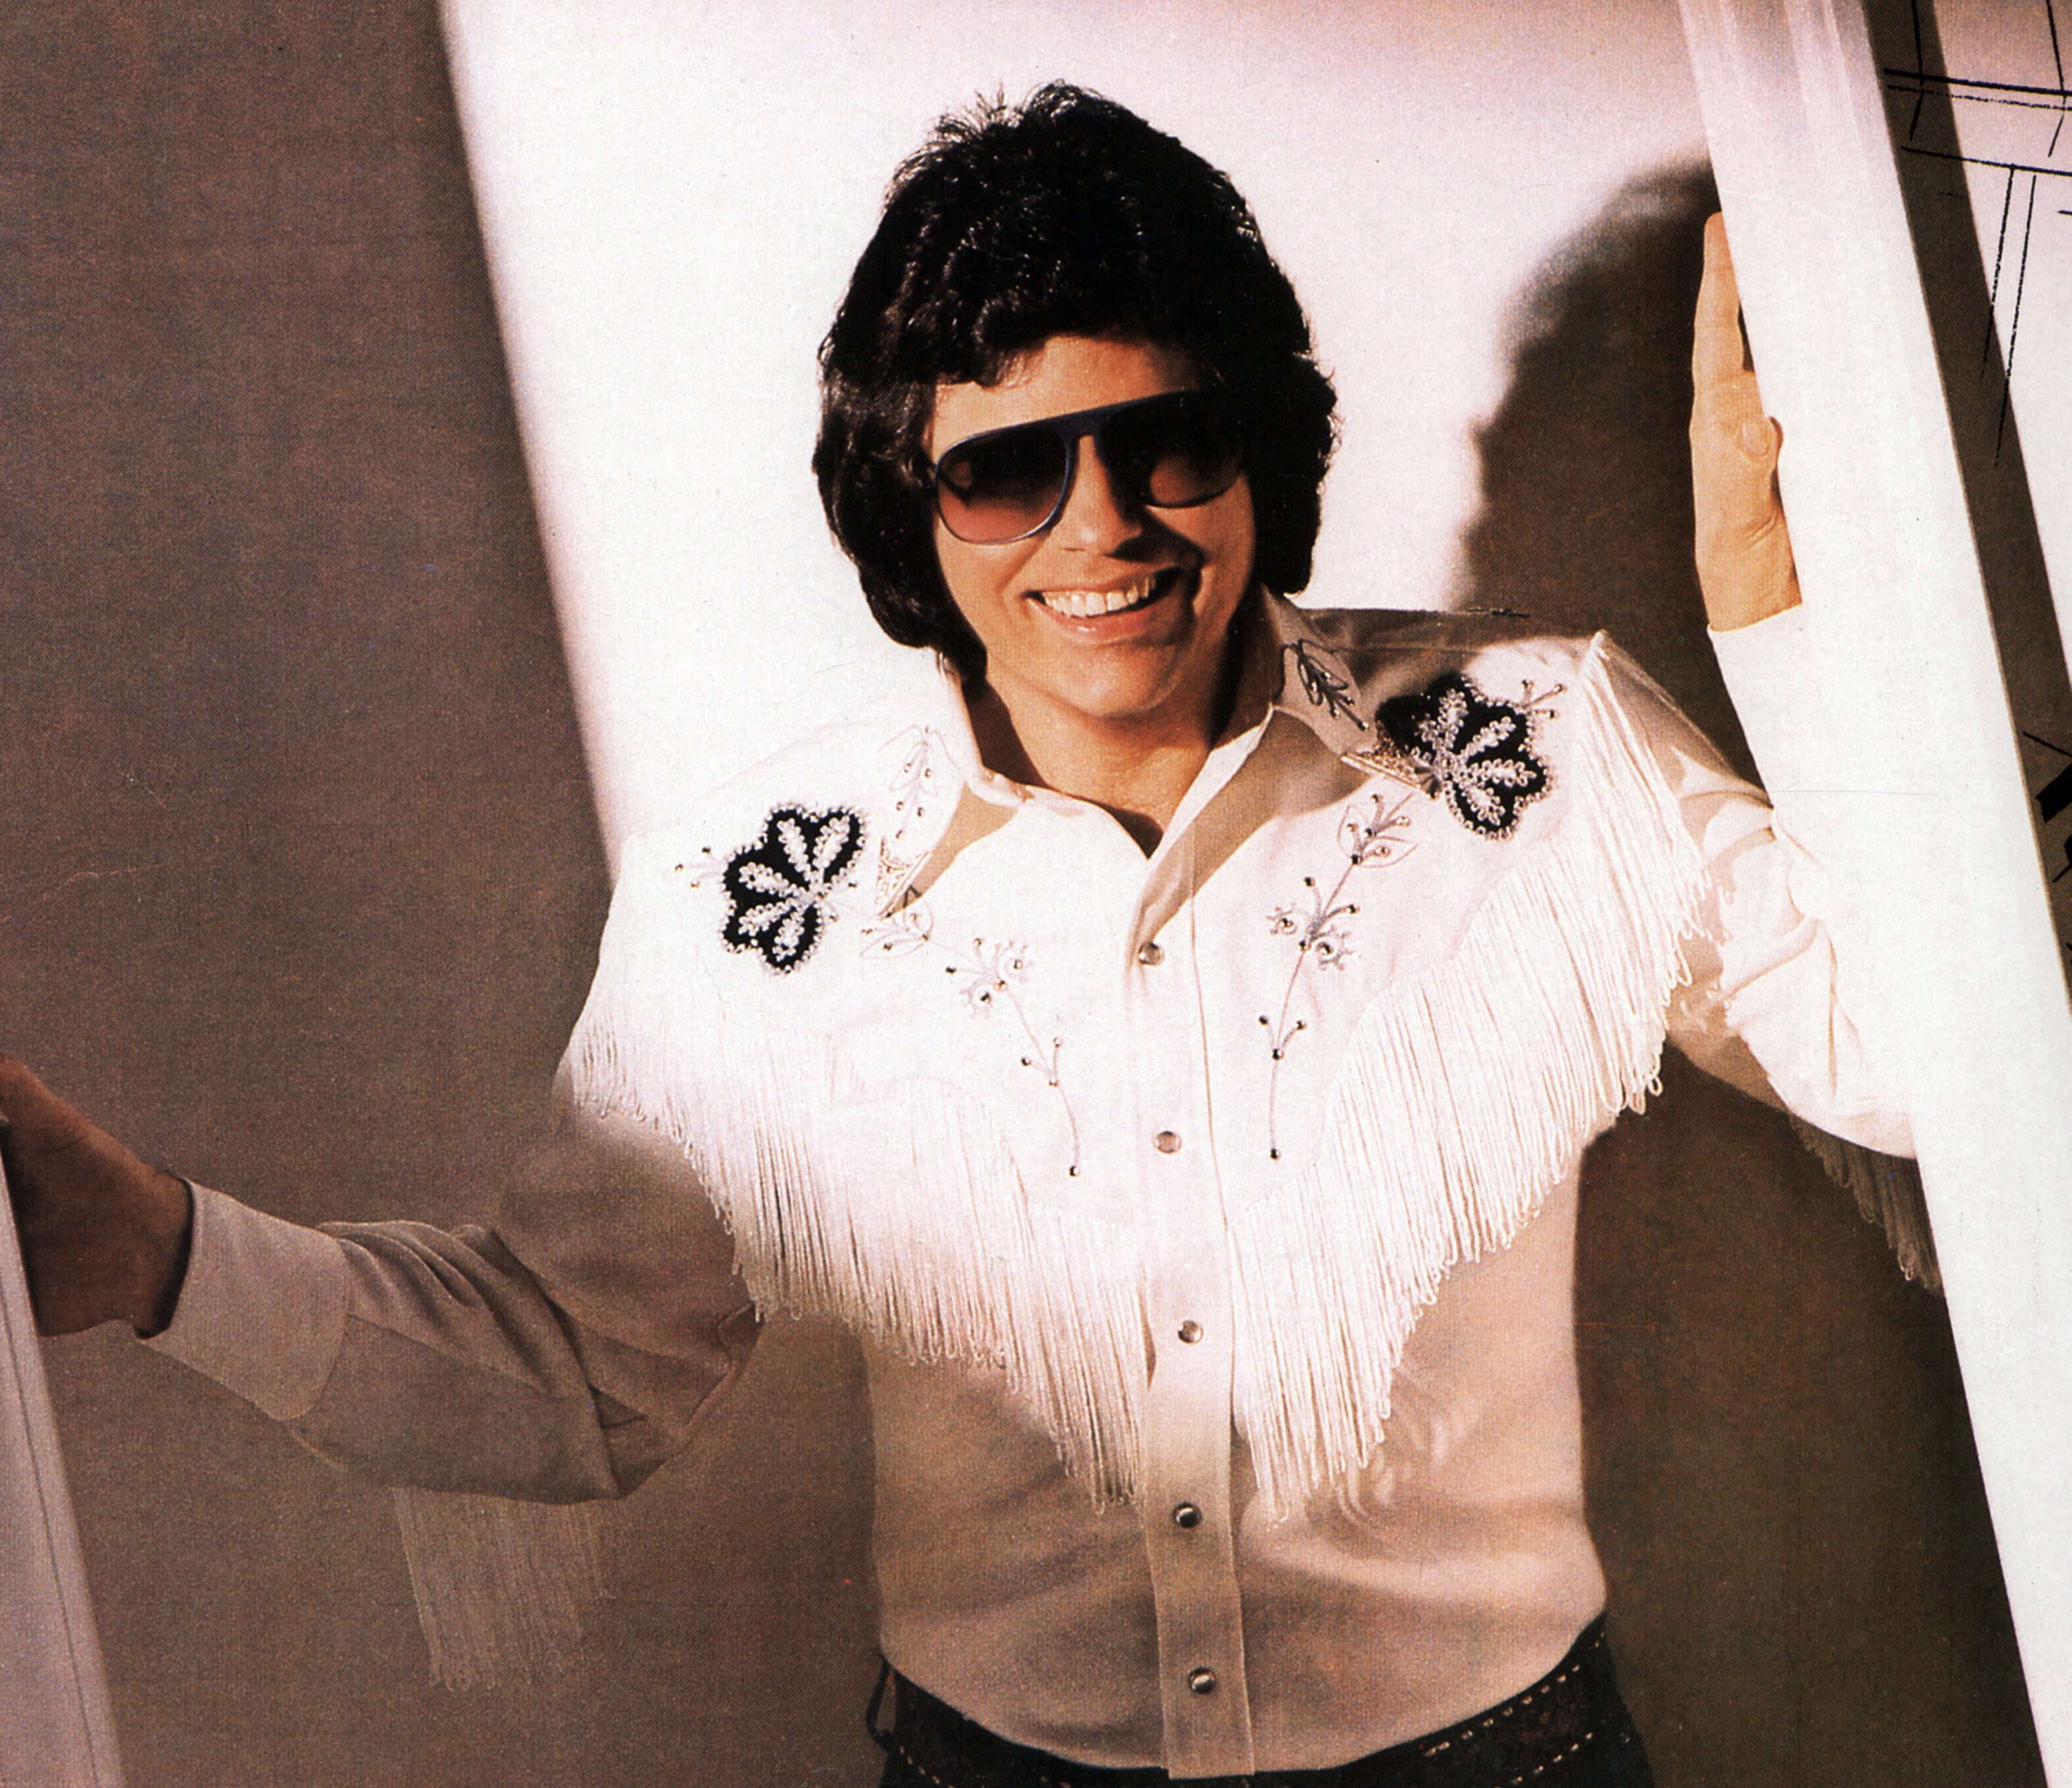 Ronnie Milsap poses for a picture in a fringe white shirt | Source: Getty Images